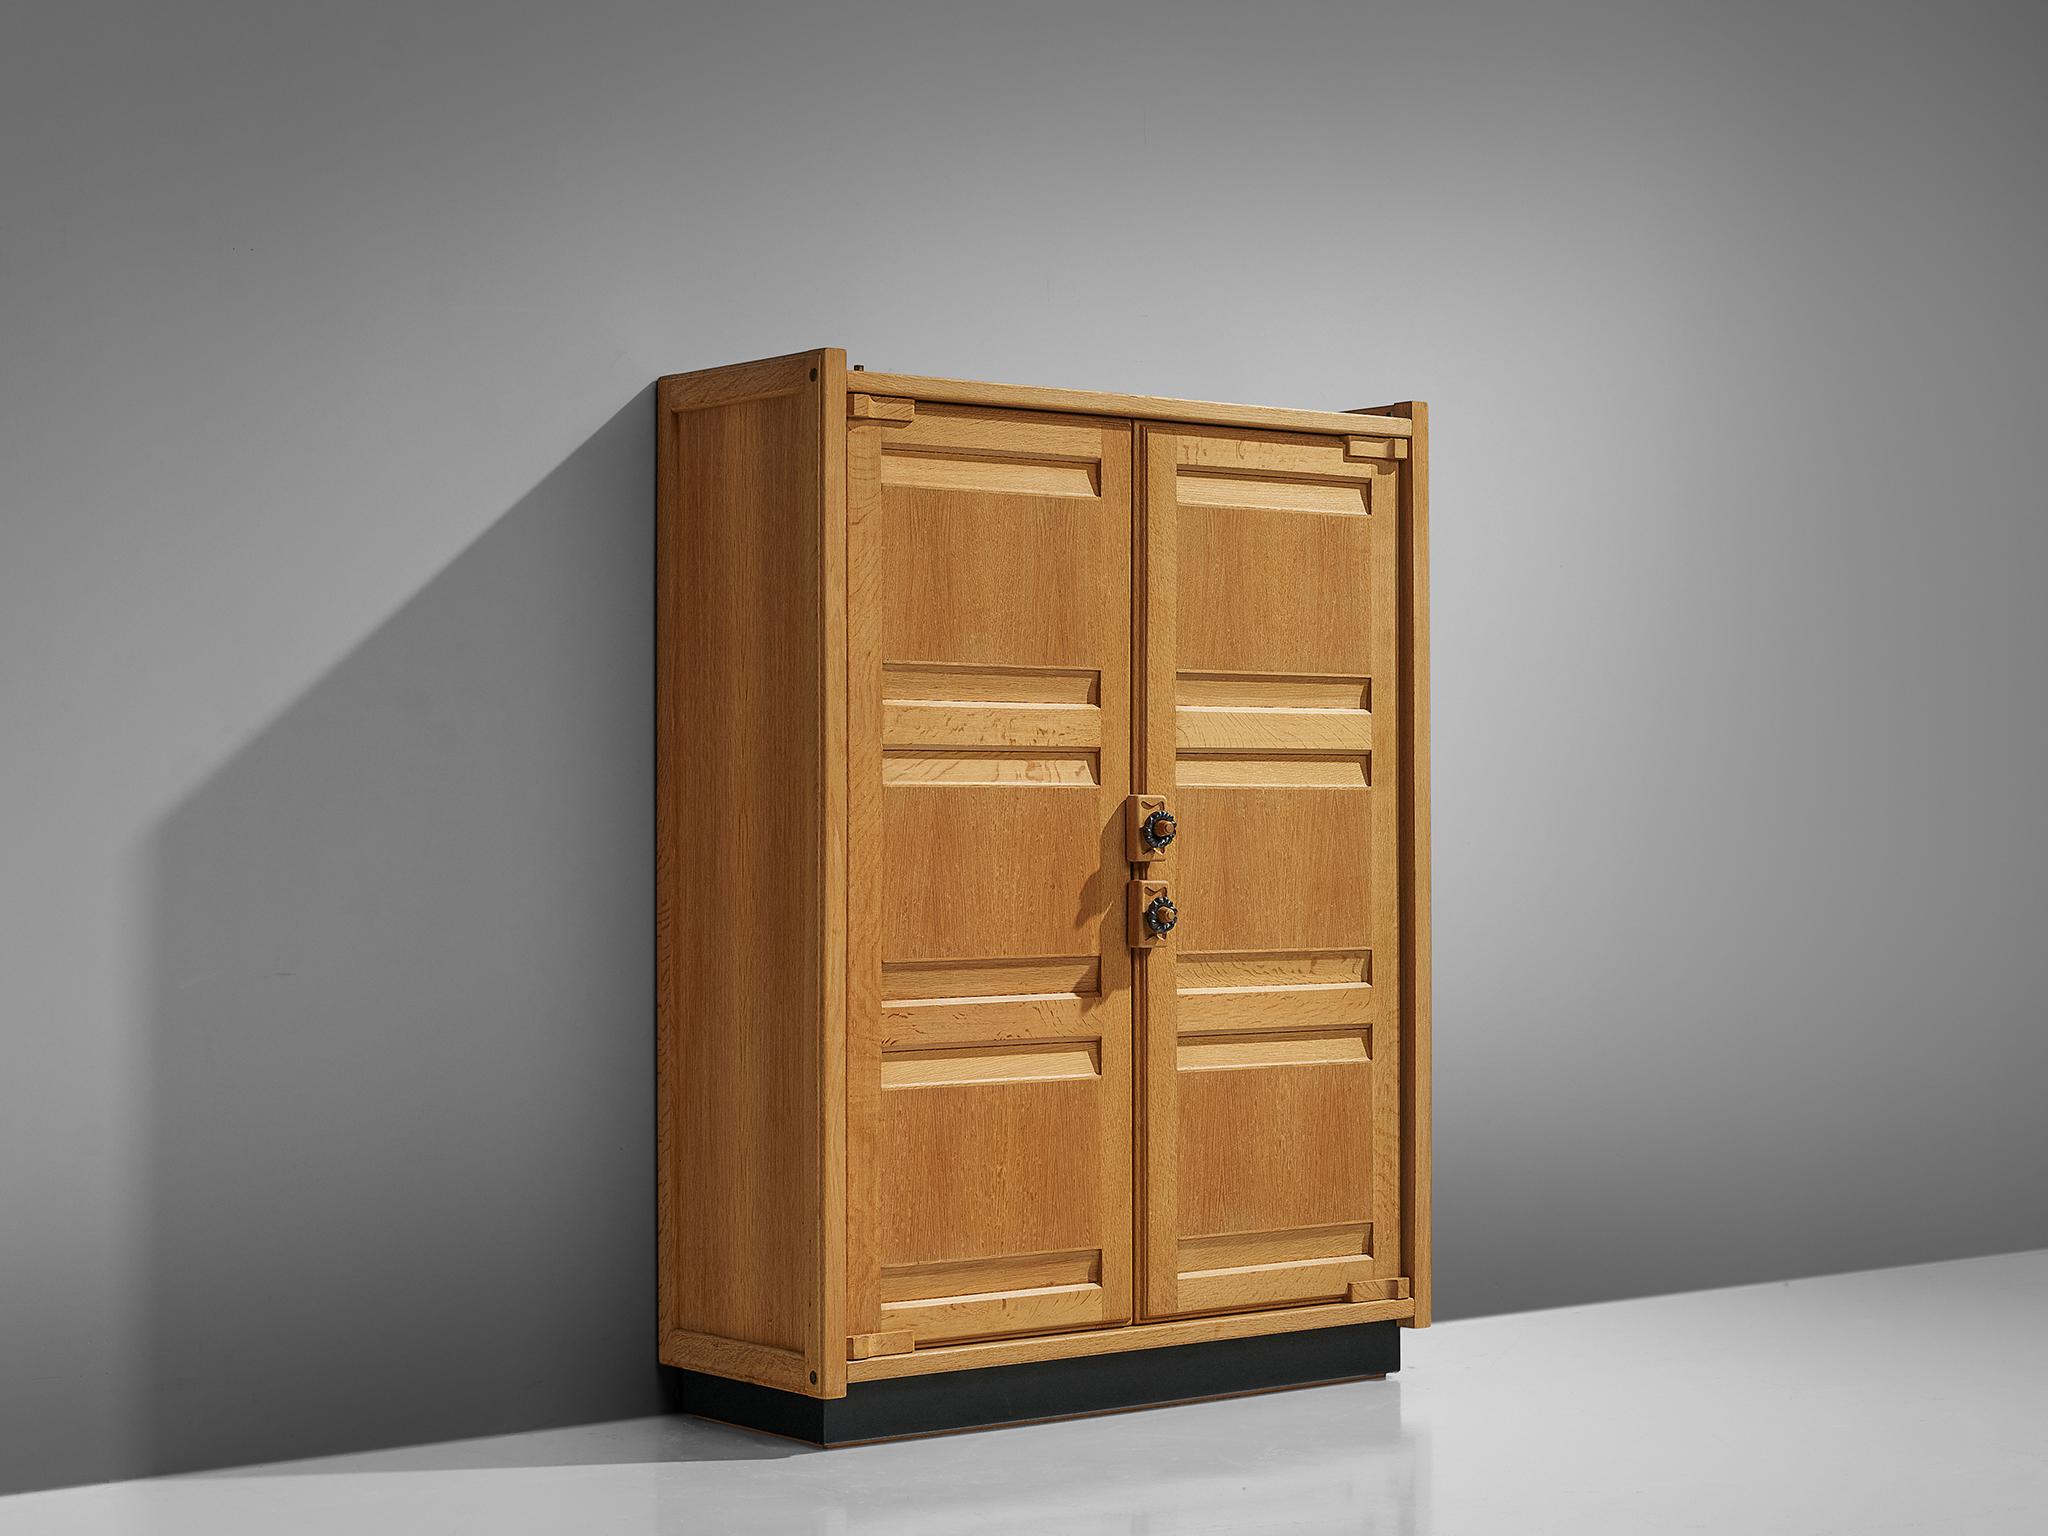 Guillerme et Chambron, armoire, oak, France, 1960s.

This case piece is designed by Guillerme and Chambron and features geometric oak inlays, creating horizontal panels on the front of the cabinet, which is characteristic for the French duo. The